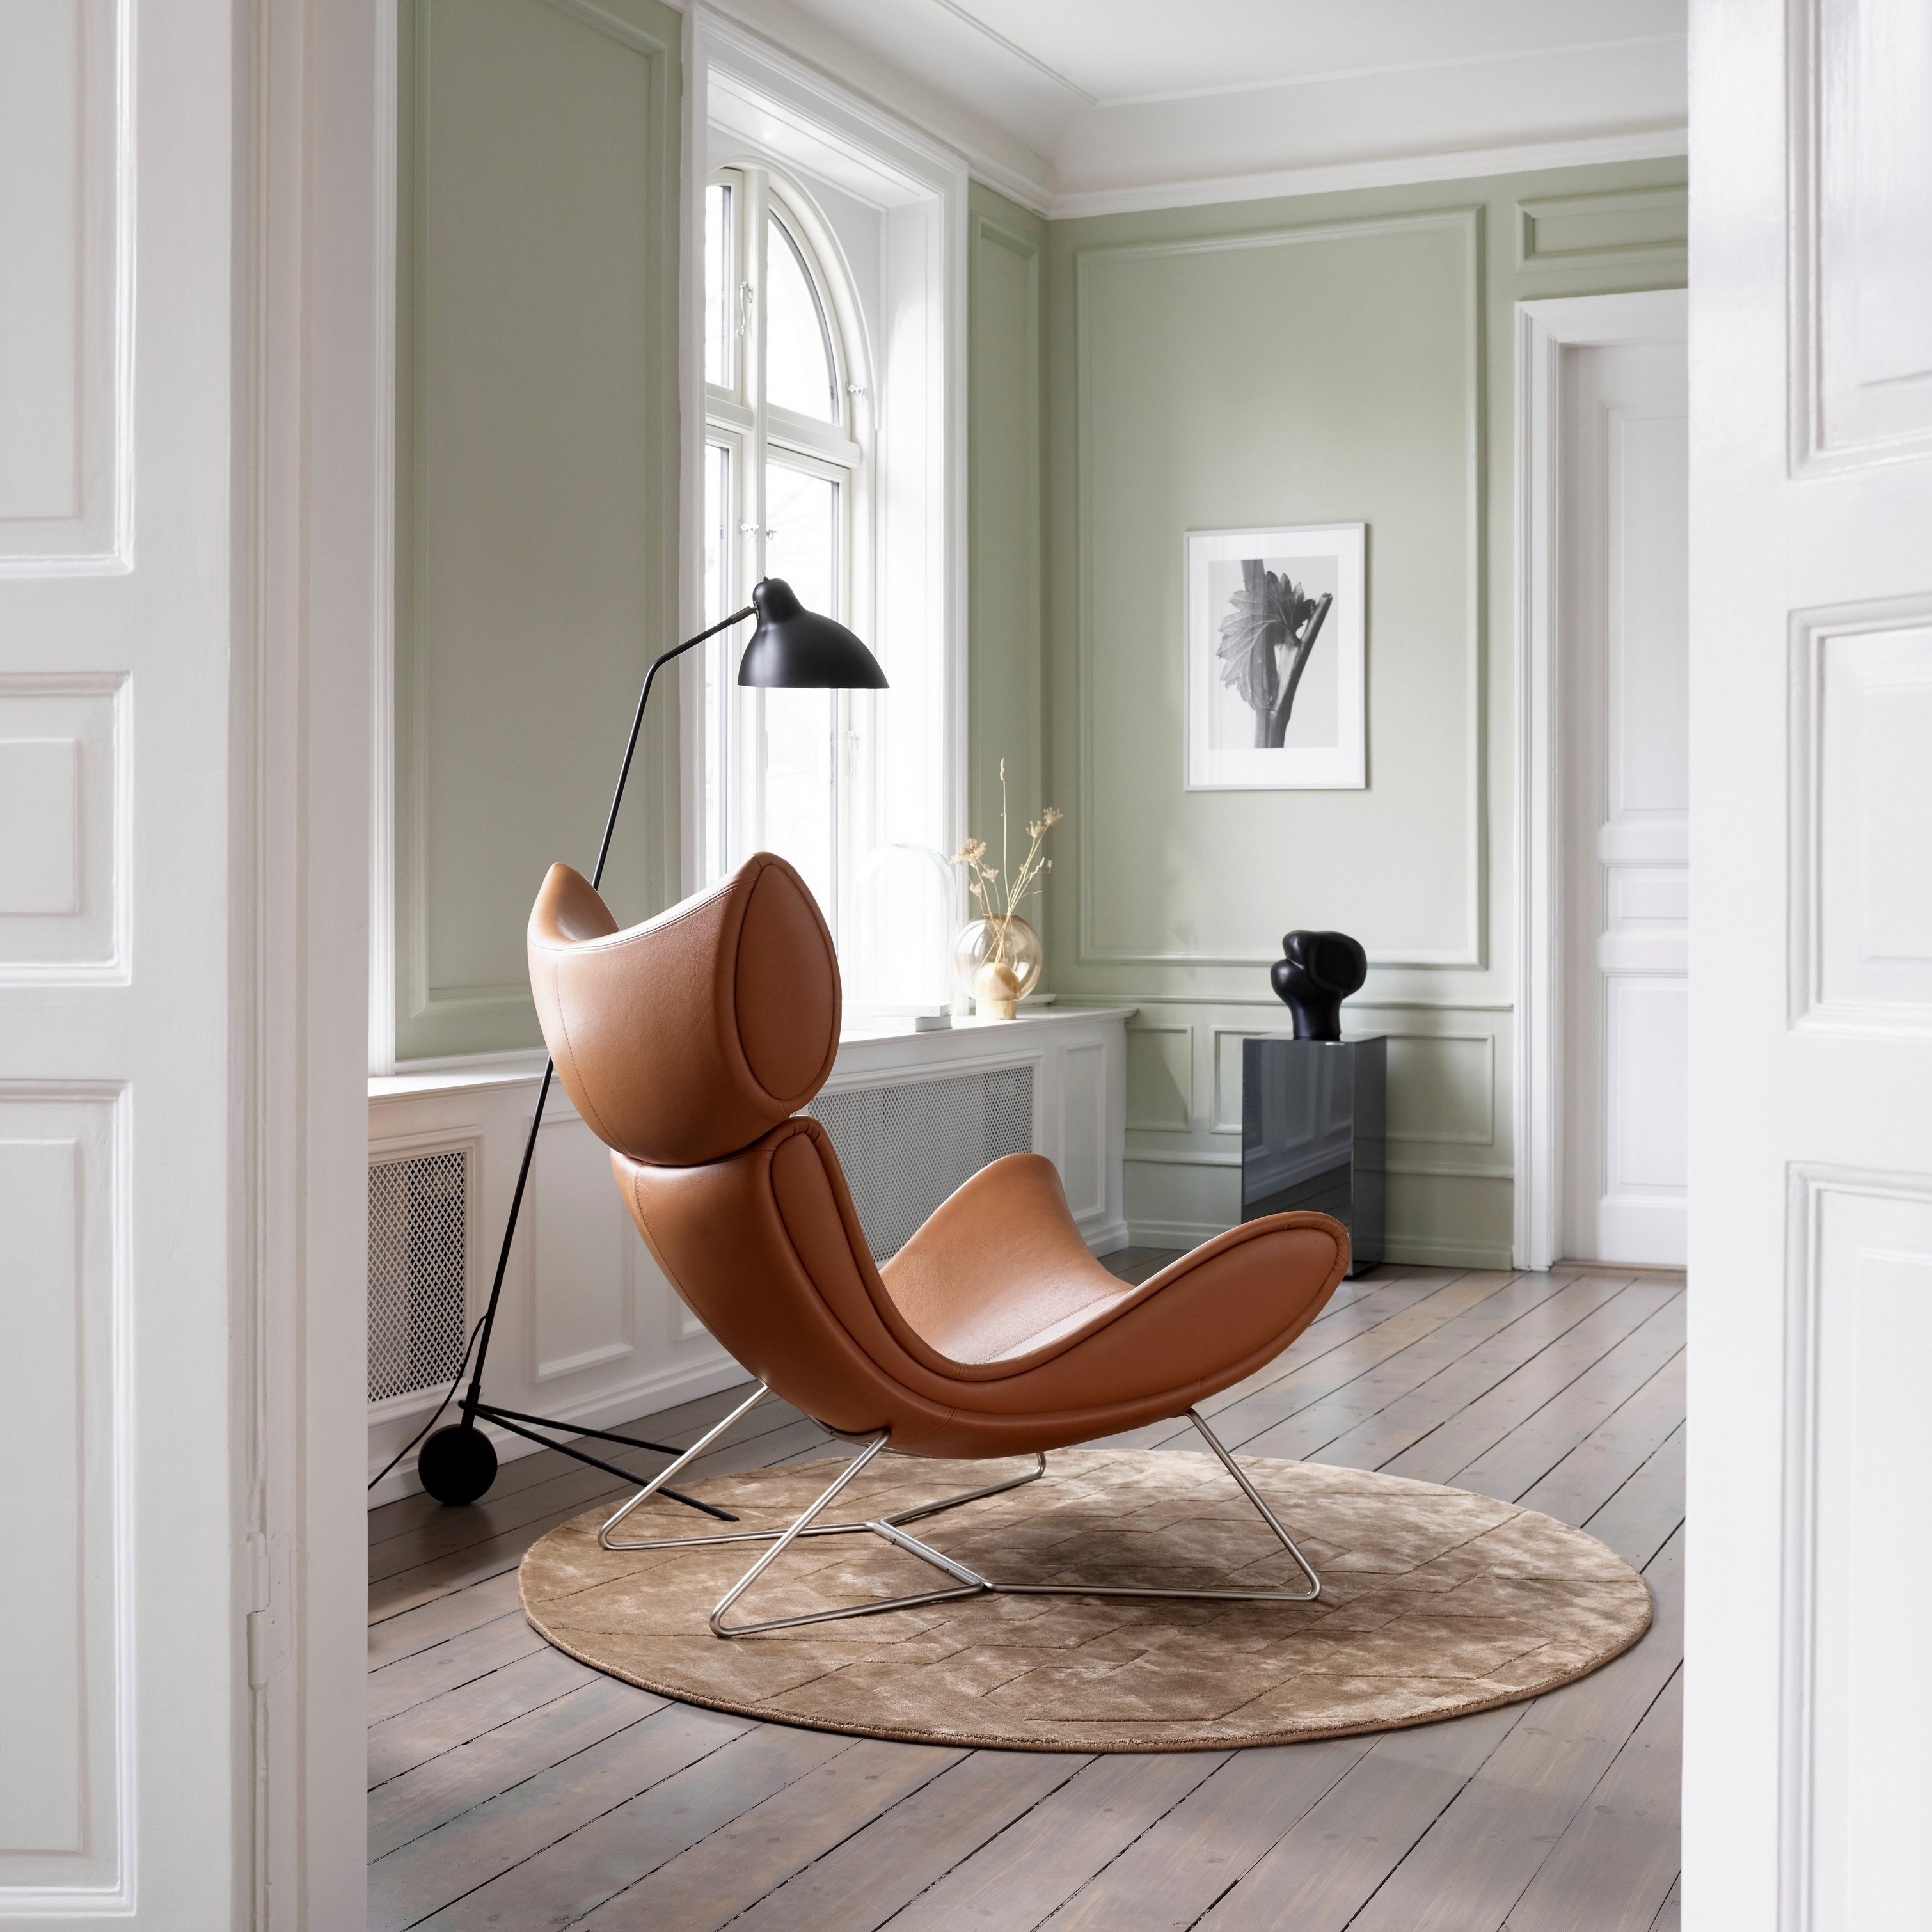 Imola chair with swivel function in camel Estoril leather